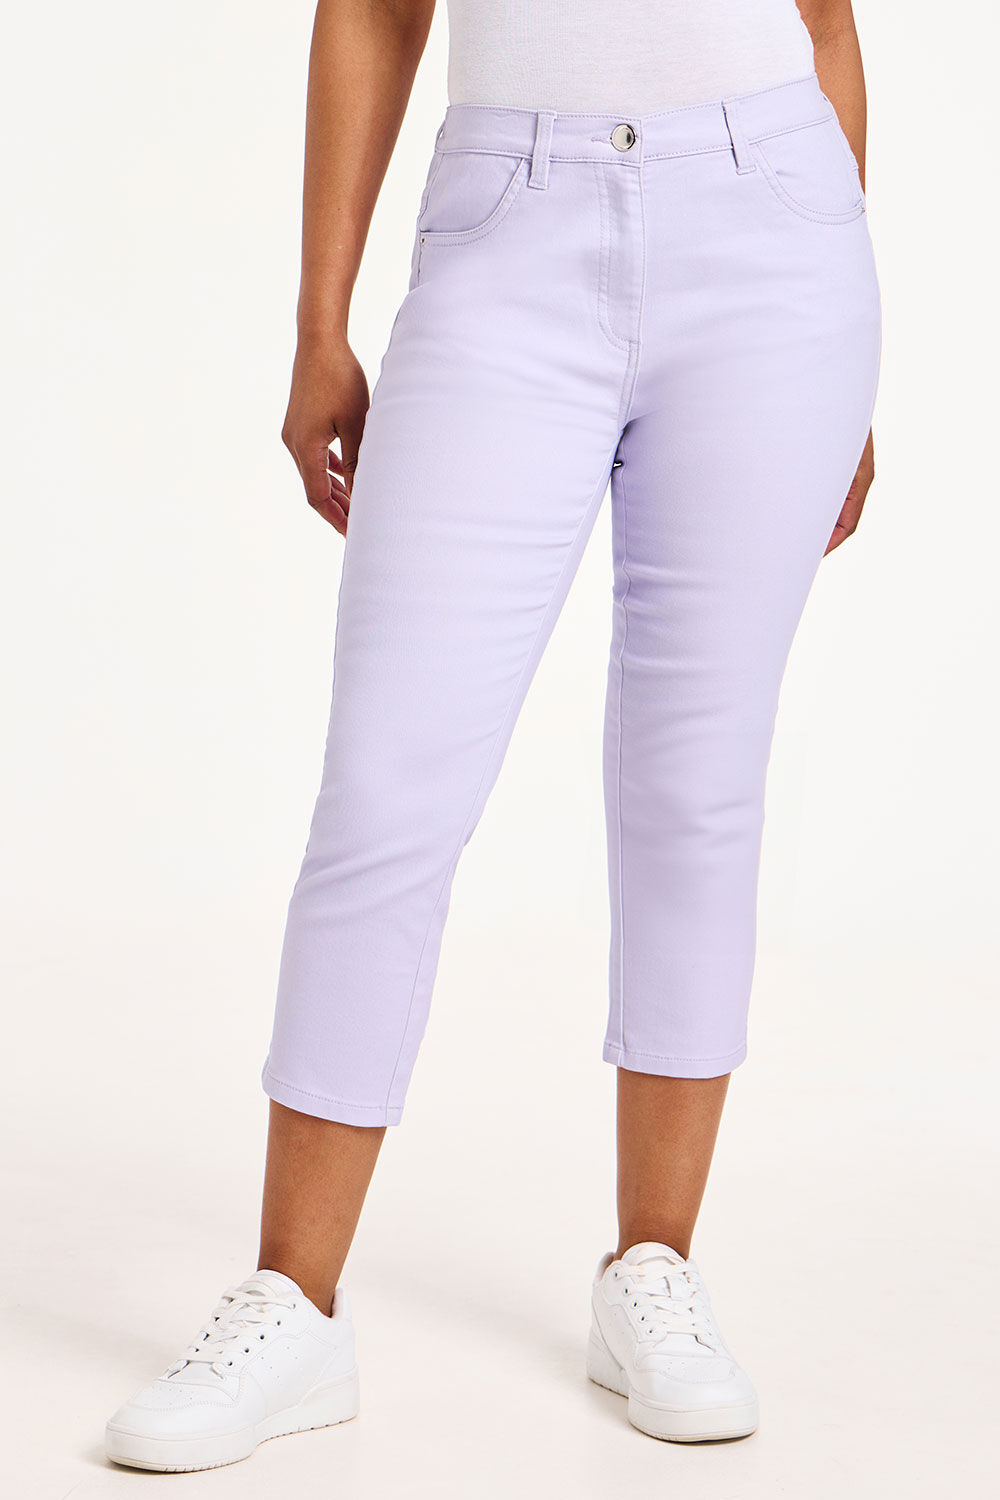 Bonmarche Lilac The Sara Coloured Cropped Jeans, Size: 18